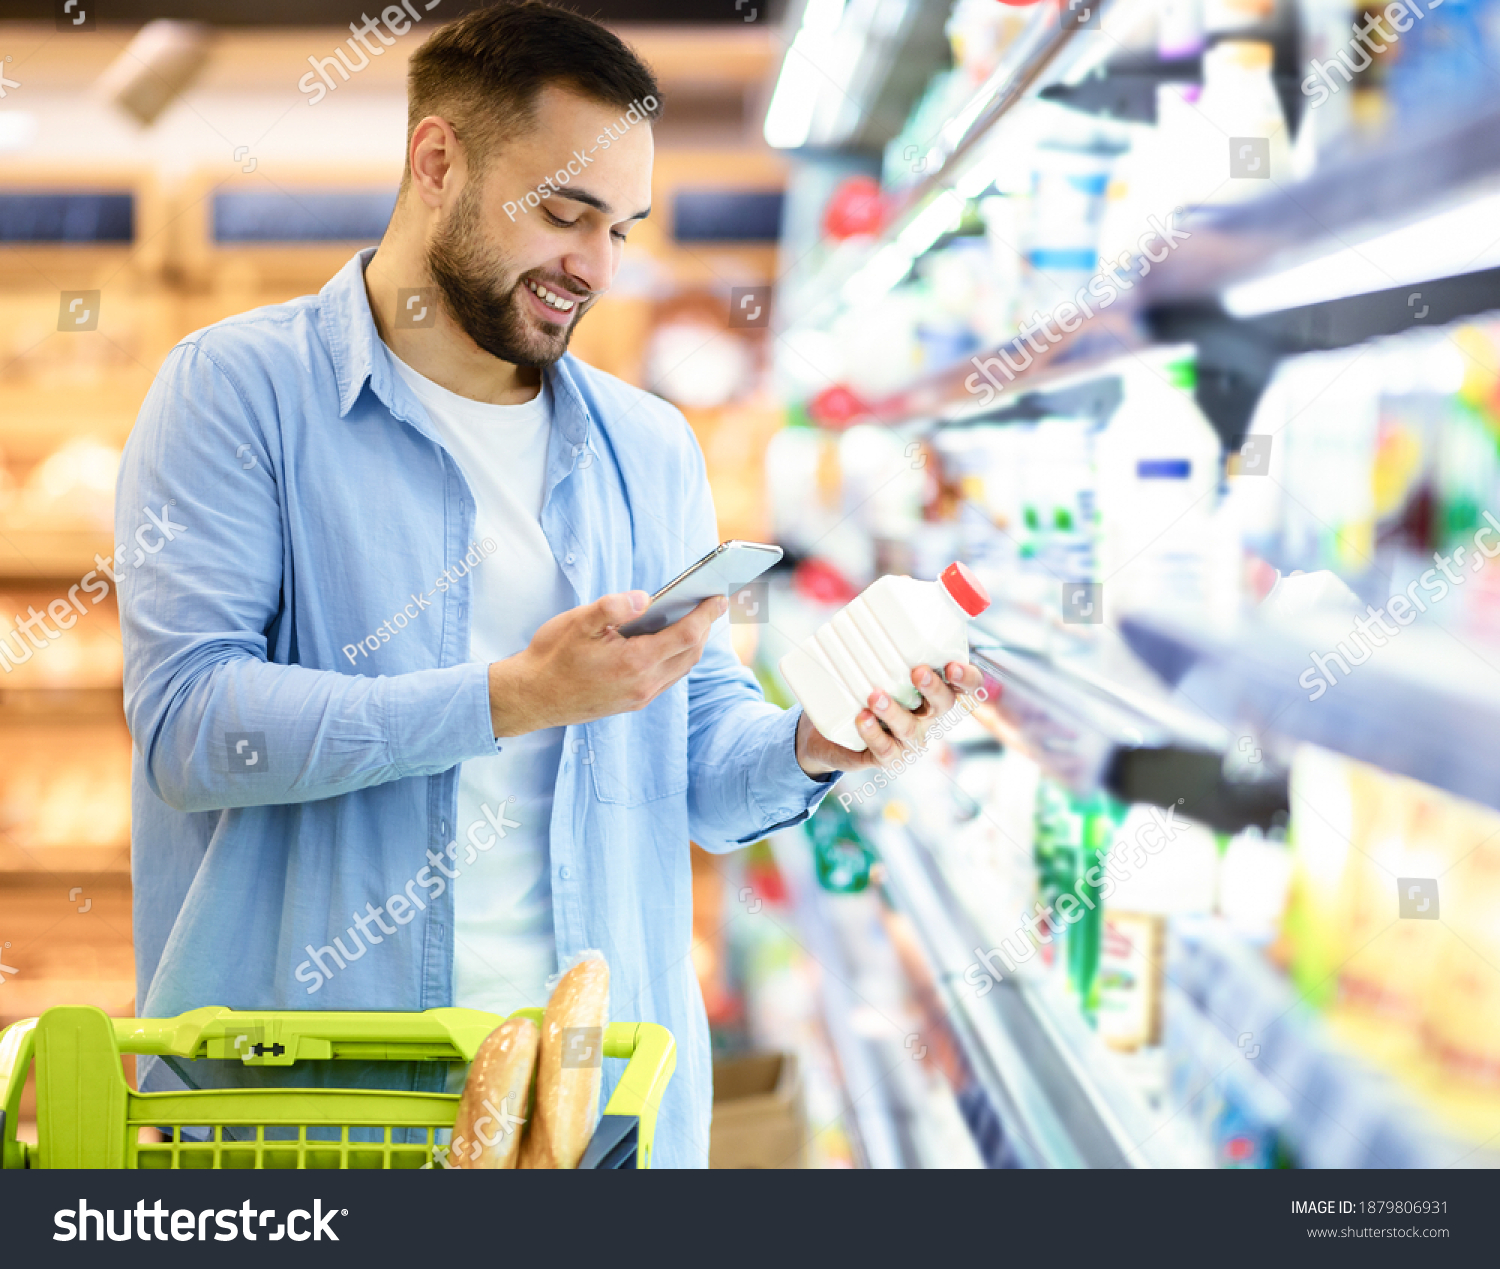 Smiling Young Man Taking Dairy Products Stock Photo 1879806931 ...